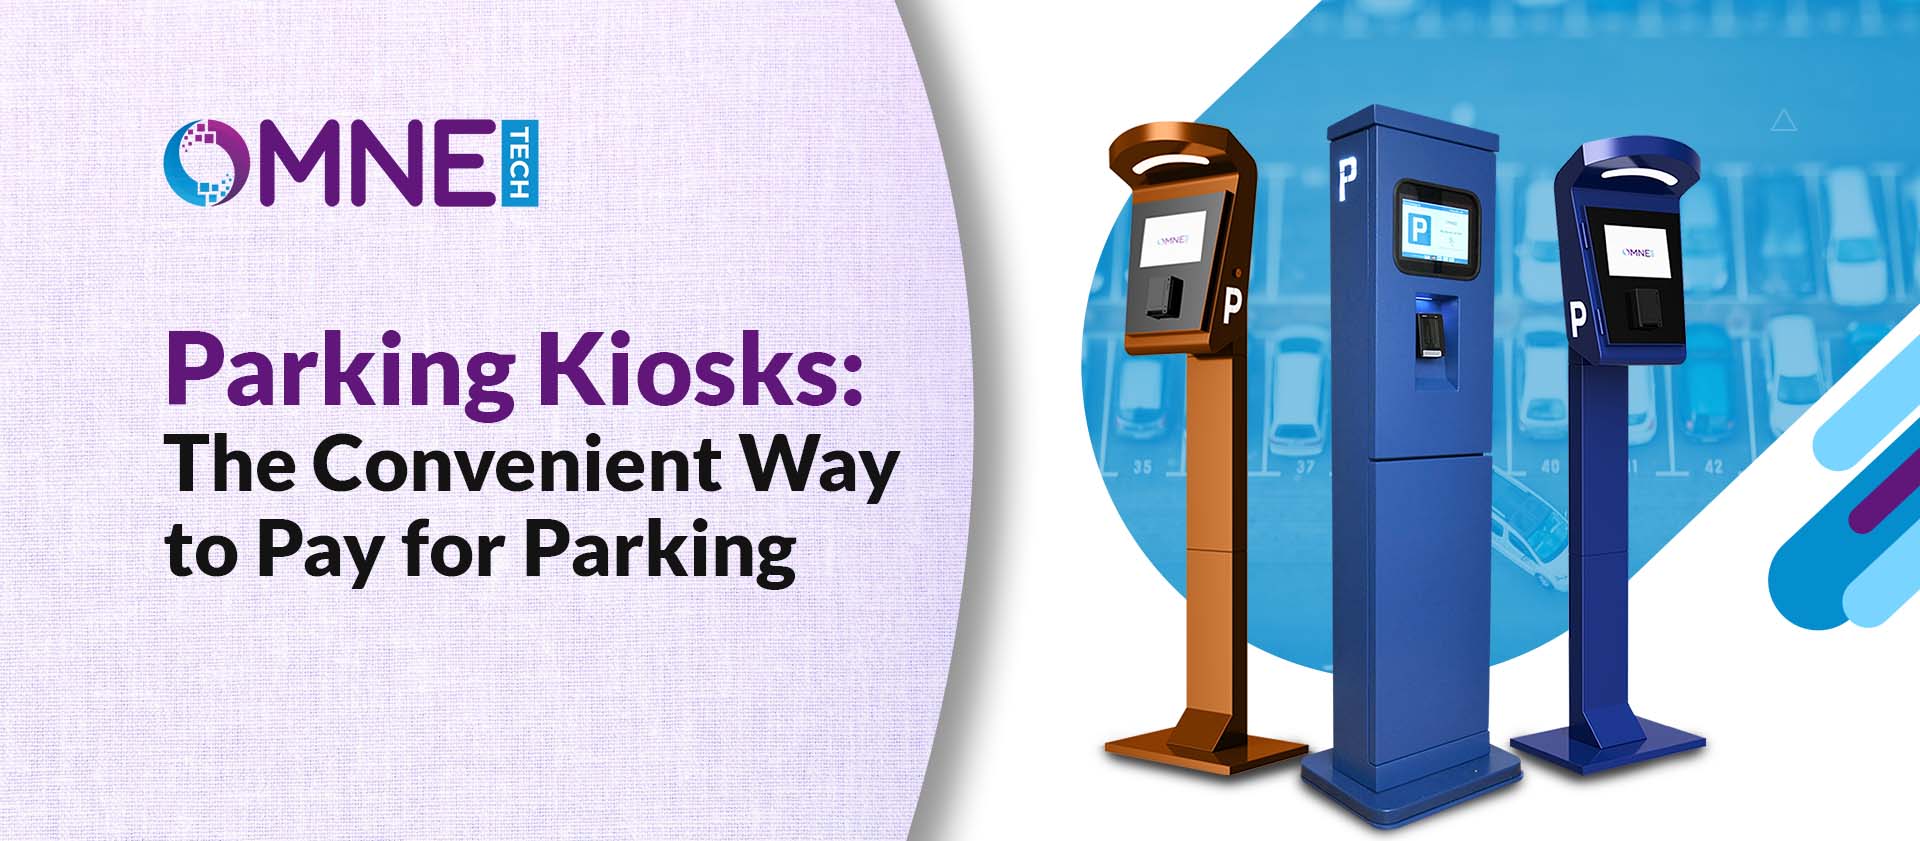 Parking Kiosks: The Convenient Way to Pay for Parking<br />
